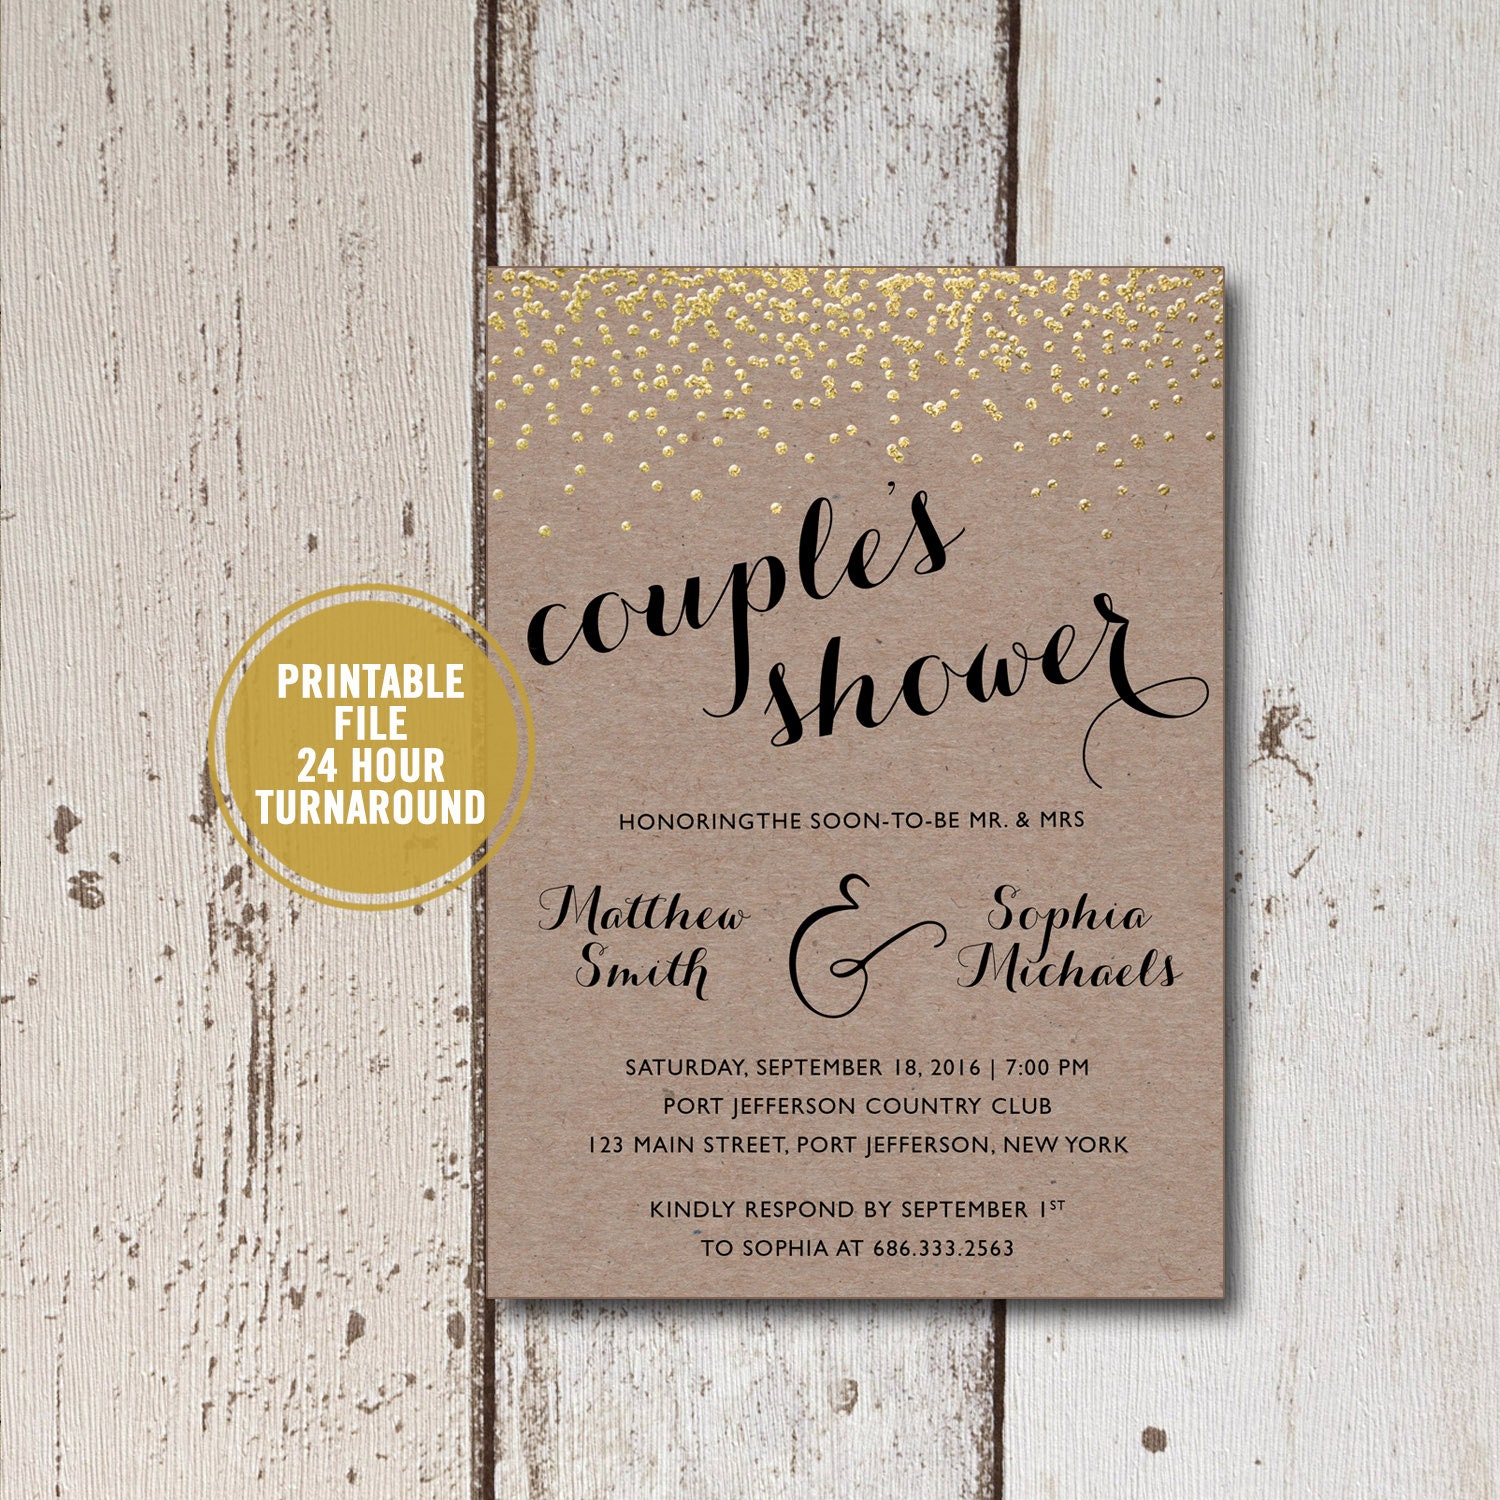 Couples Shower Invitations Couples Wedding Shower Invitations Templates Friend Invitation